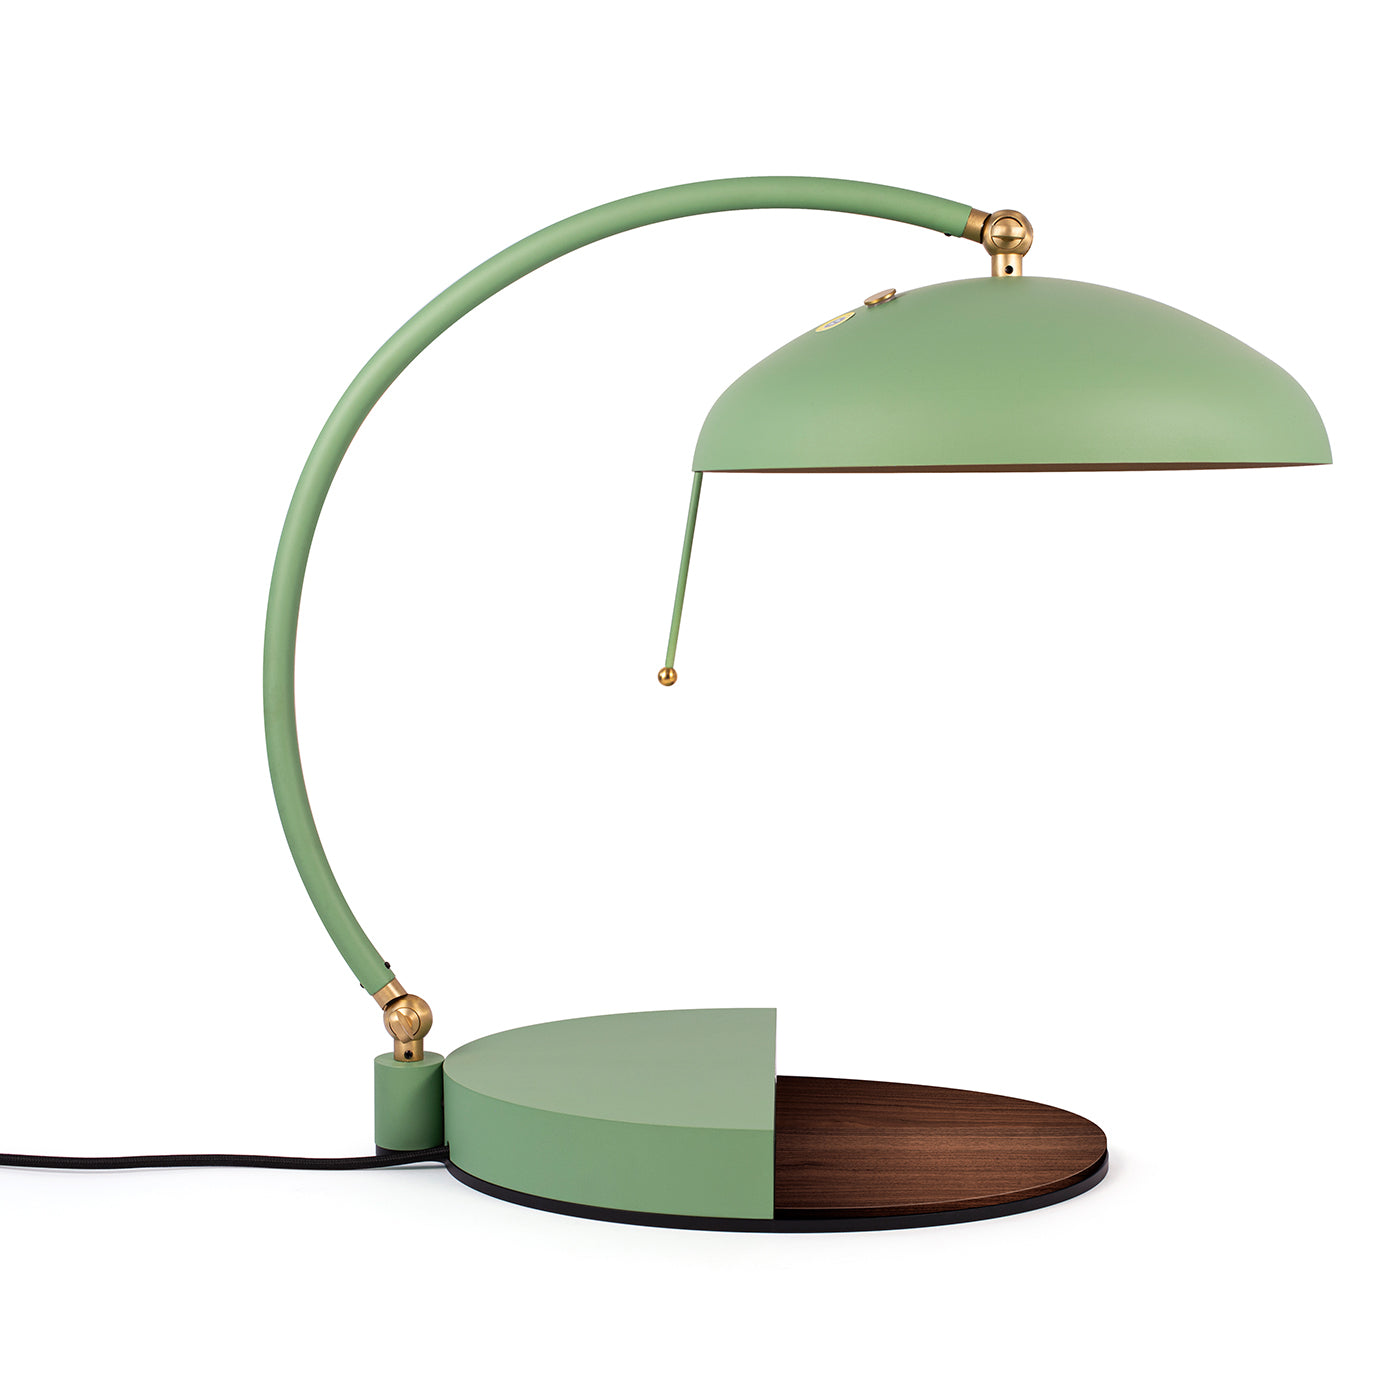 Serena Ministeriale Green Table Lamp with Walnut Wood Details - Alternative view 3